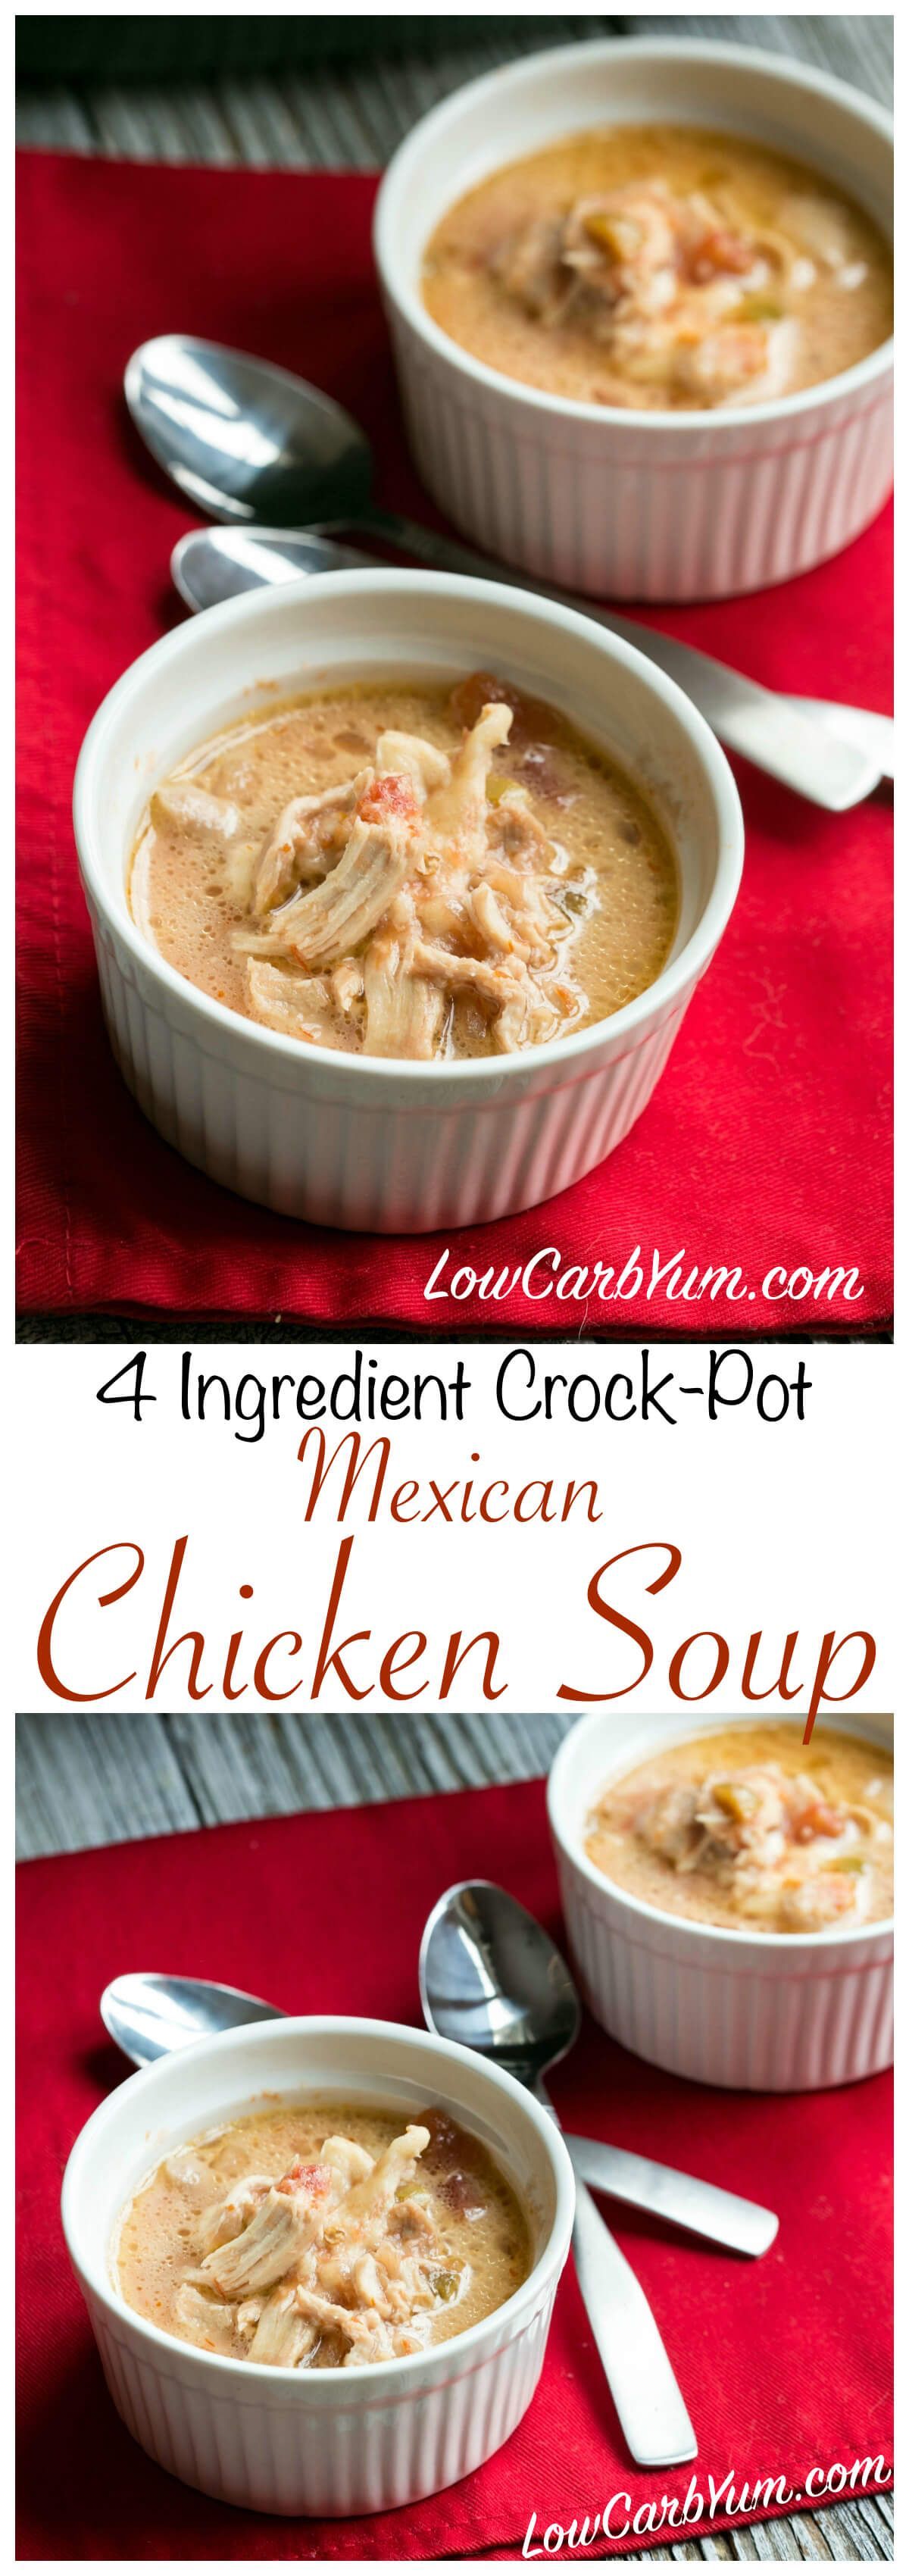 No time for cooking? Try this easy low carb high fat crock pot Mexican chicken sou